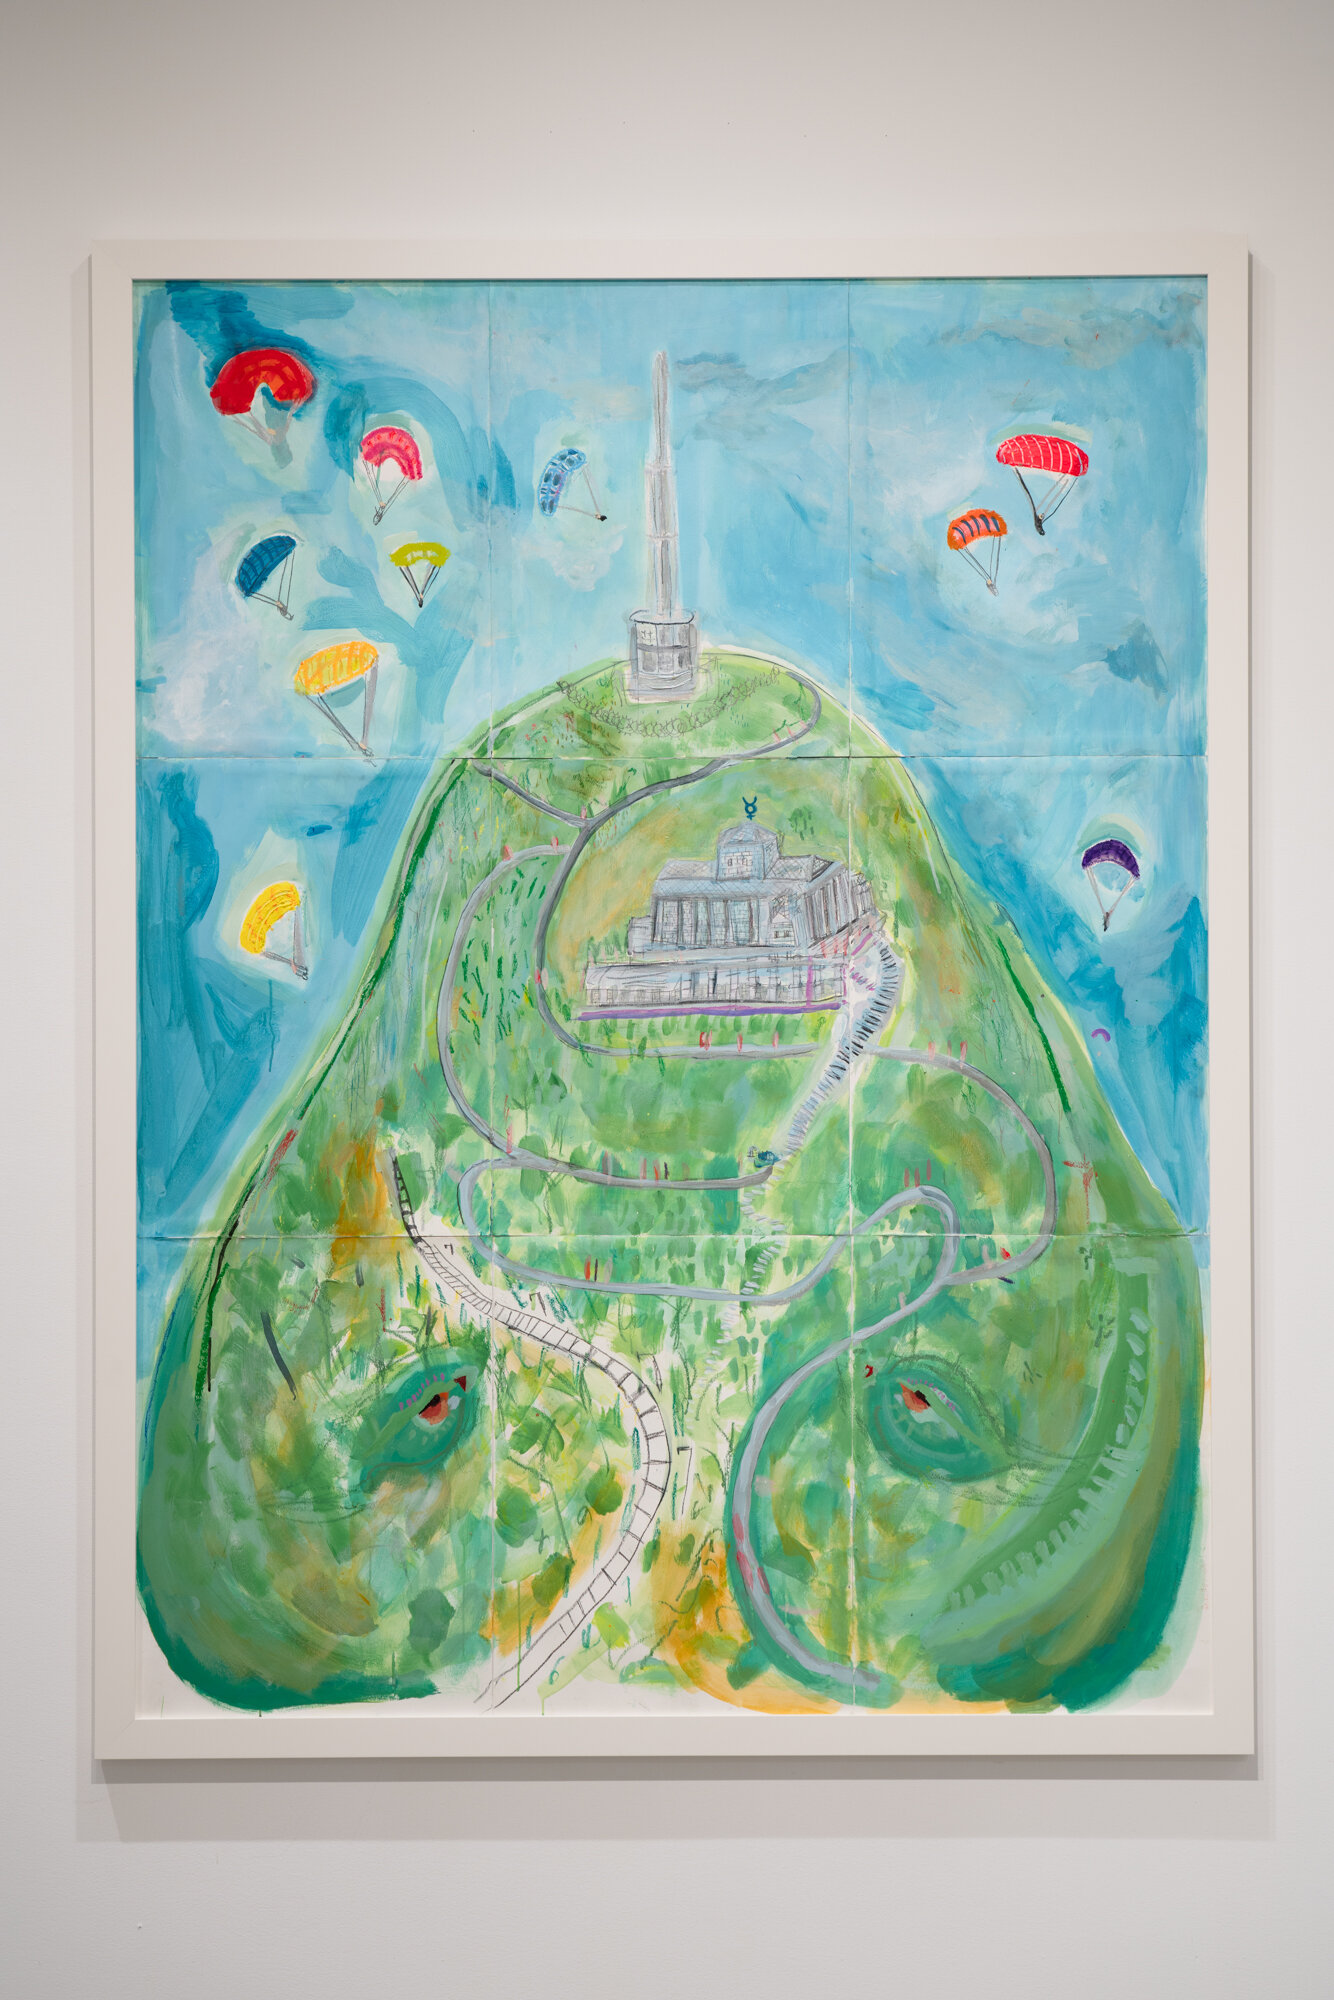  Temple de Mercure (imagined as active), antenna, paragliding, 2019. Mix-media on assembled 18 in x 24 in Watercolor paper. Acrylic paint, graphite, watercolor, marker, crayon, oil stick, volcanic water. 75.5" x 57.5"   